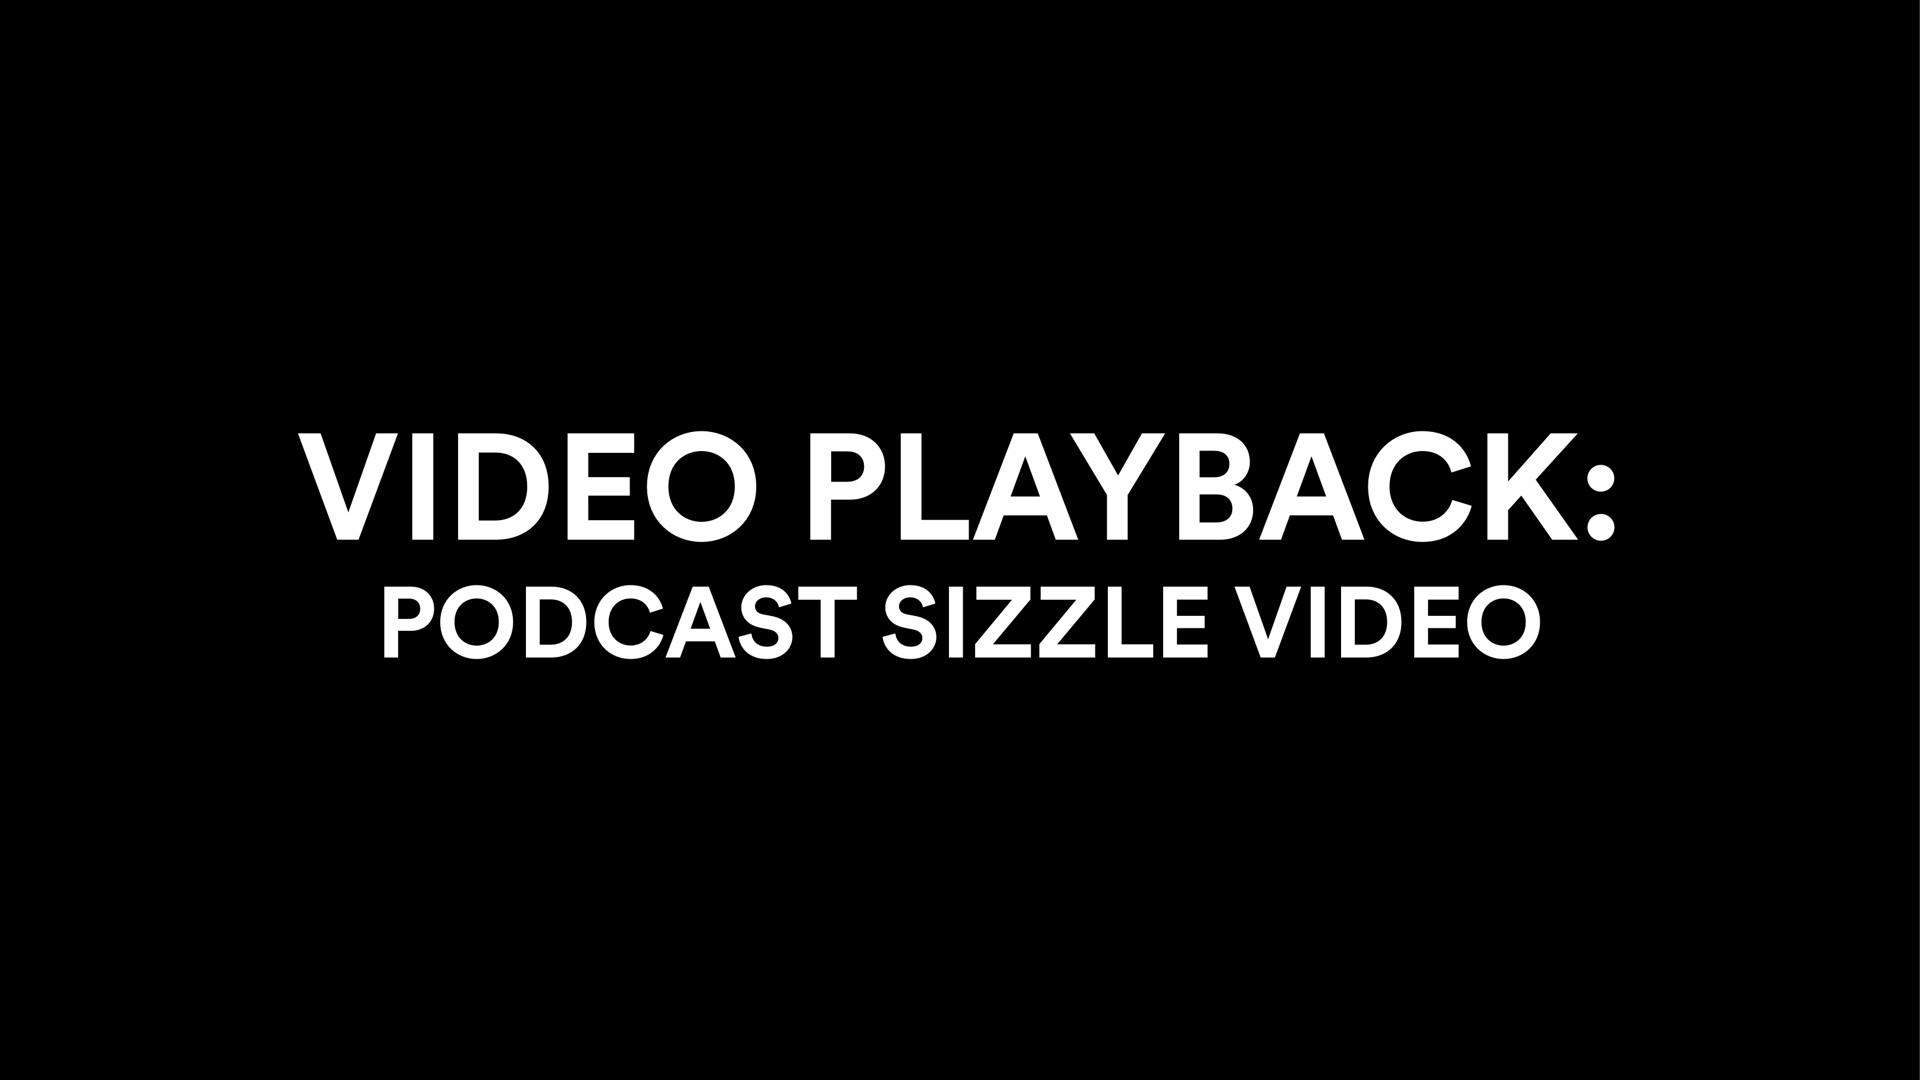 video playback sizzle video | Spotify